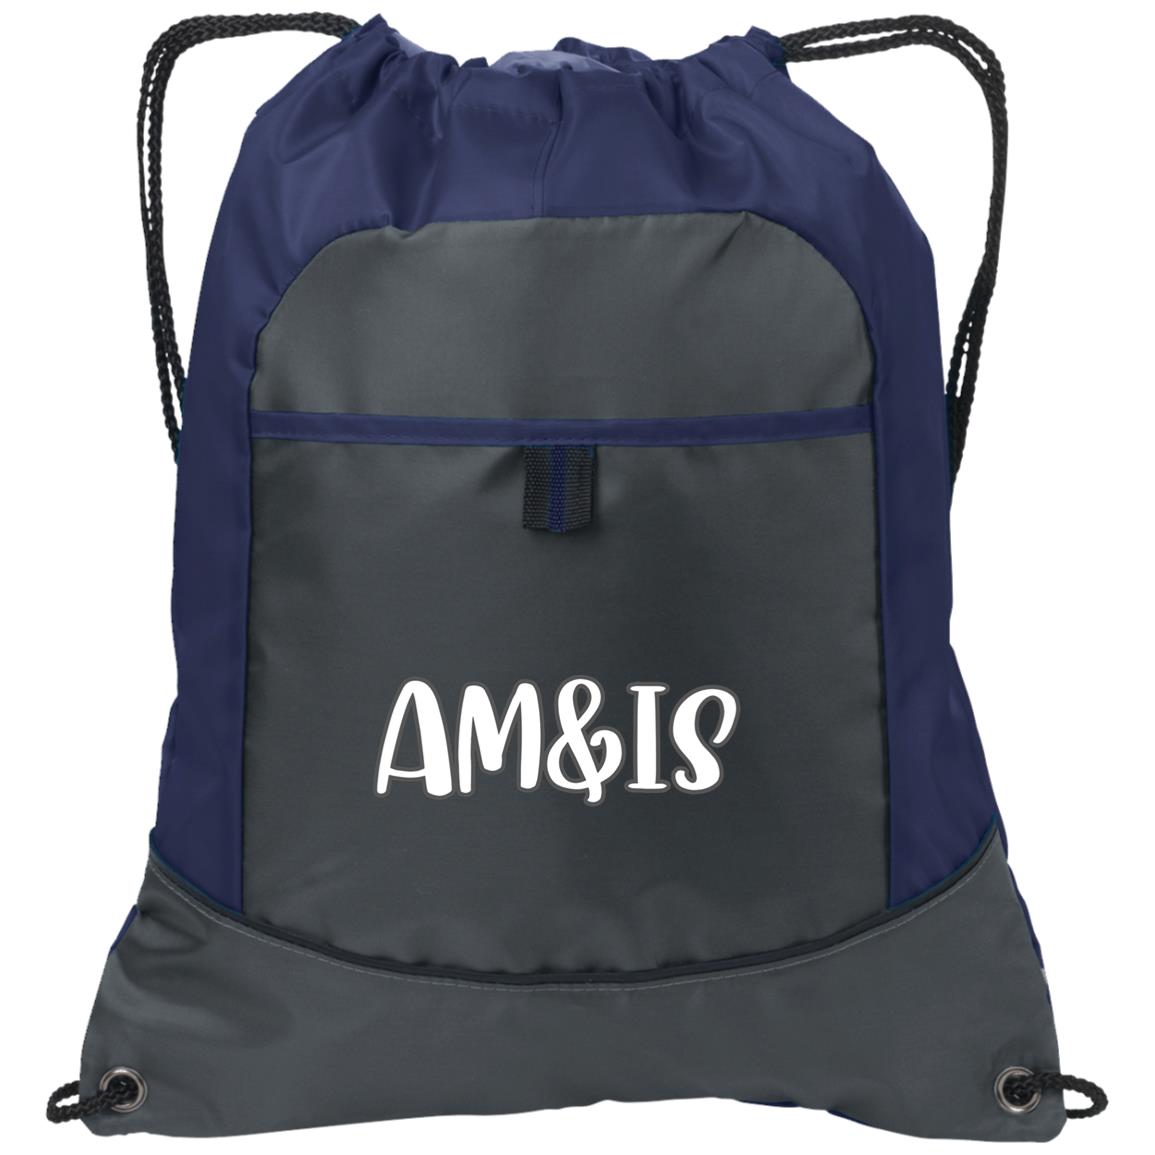 DEEP SMOKE TRUE NAVY ONE SIZE - AM&IS Activewear Pocket Cinch Pack - Backpacks at TFC&H Co.